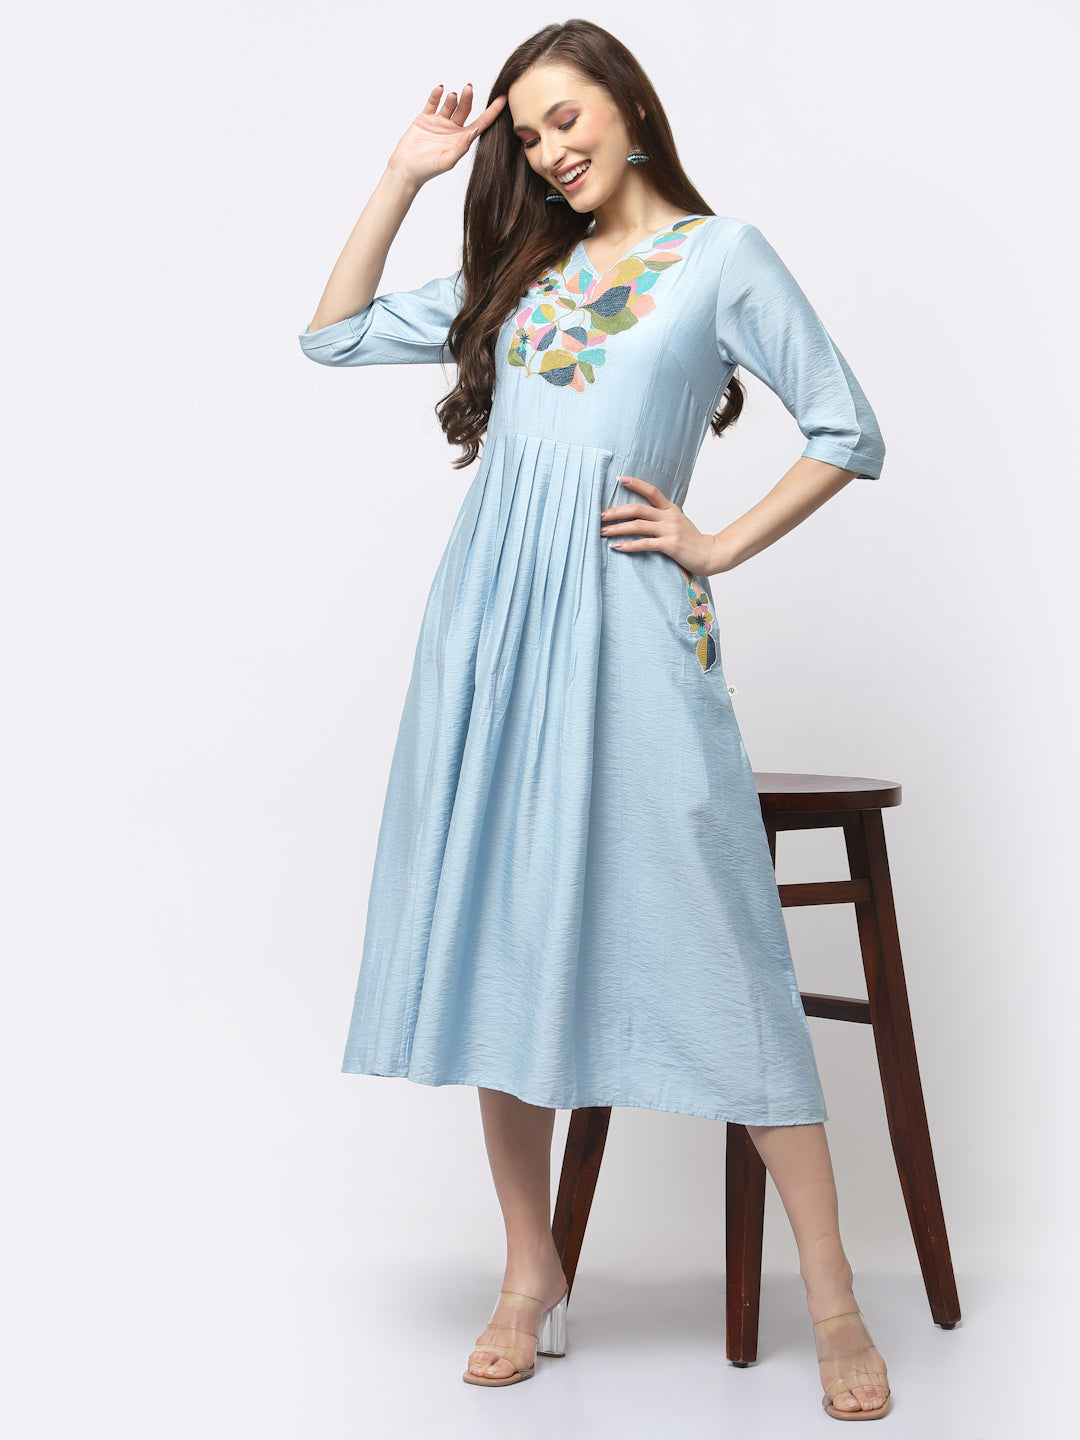 Pale Aqua Floral Embroidered Front Gathered Dress with Neck Detail - ARH1216